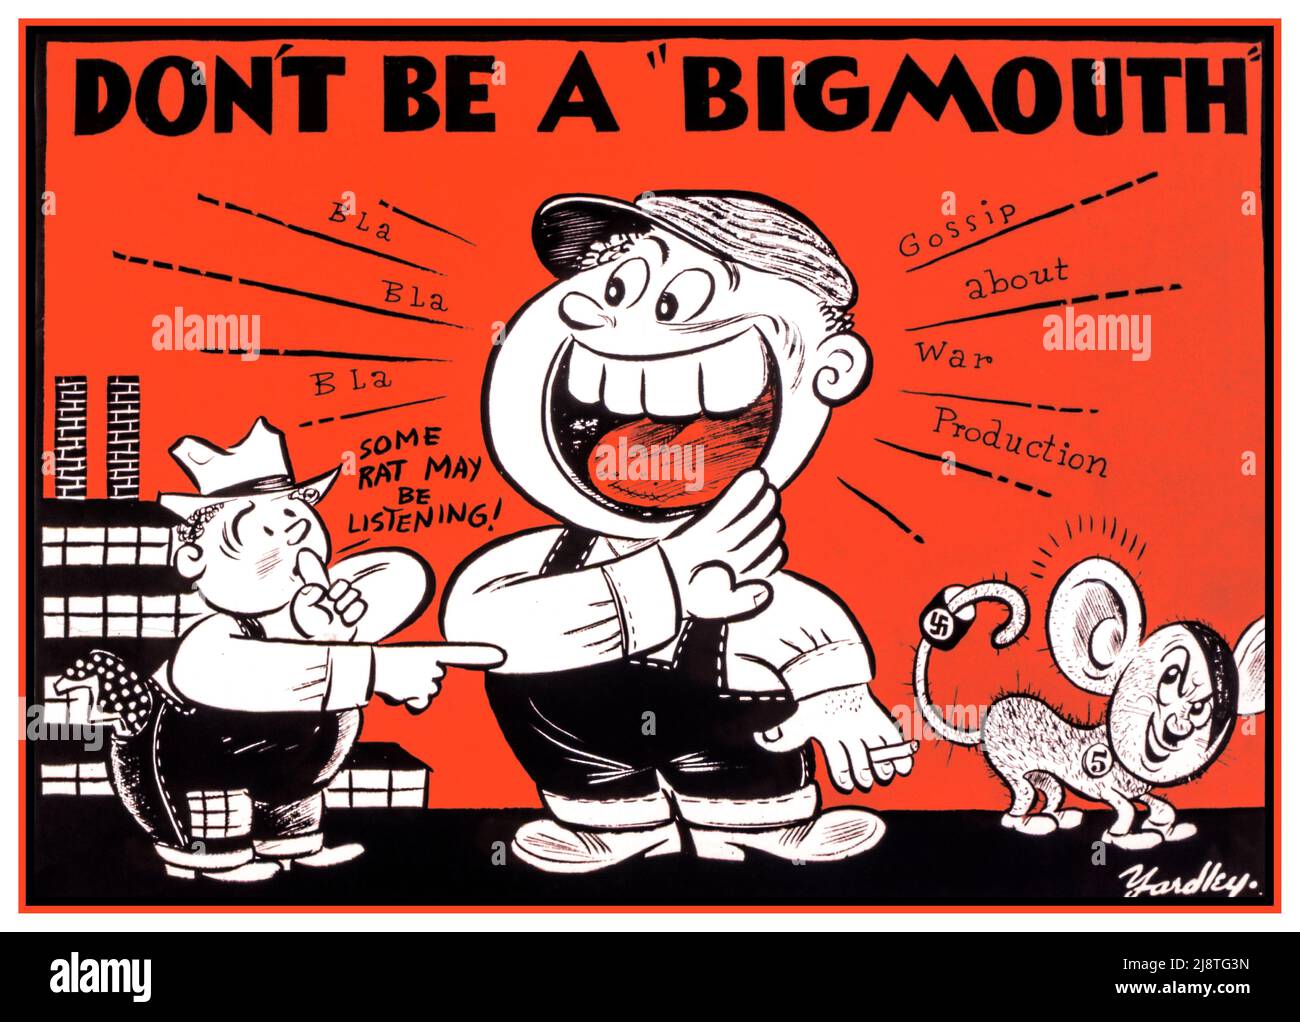 WW2 USA Propaganda Poster asking war workers not to pass on details of their work and industrial output 'Don't be a bigmouth' A cartoon caricature of a rat styled like Nazi Germany Adolf Hitler with a swastika on his tail. Date between circa 1942 and circa 1943 Office for Emergency Management. War Production Board. (01/1942 - 11/03/1945) Stock Photo